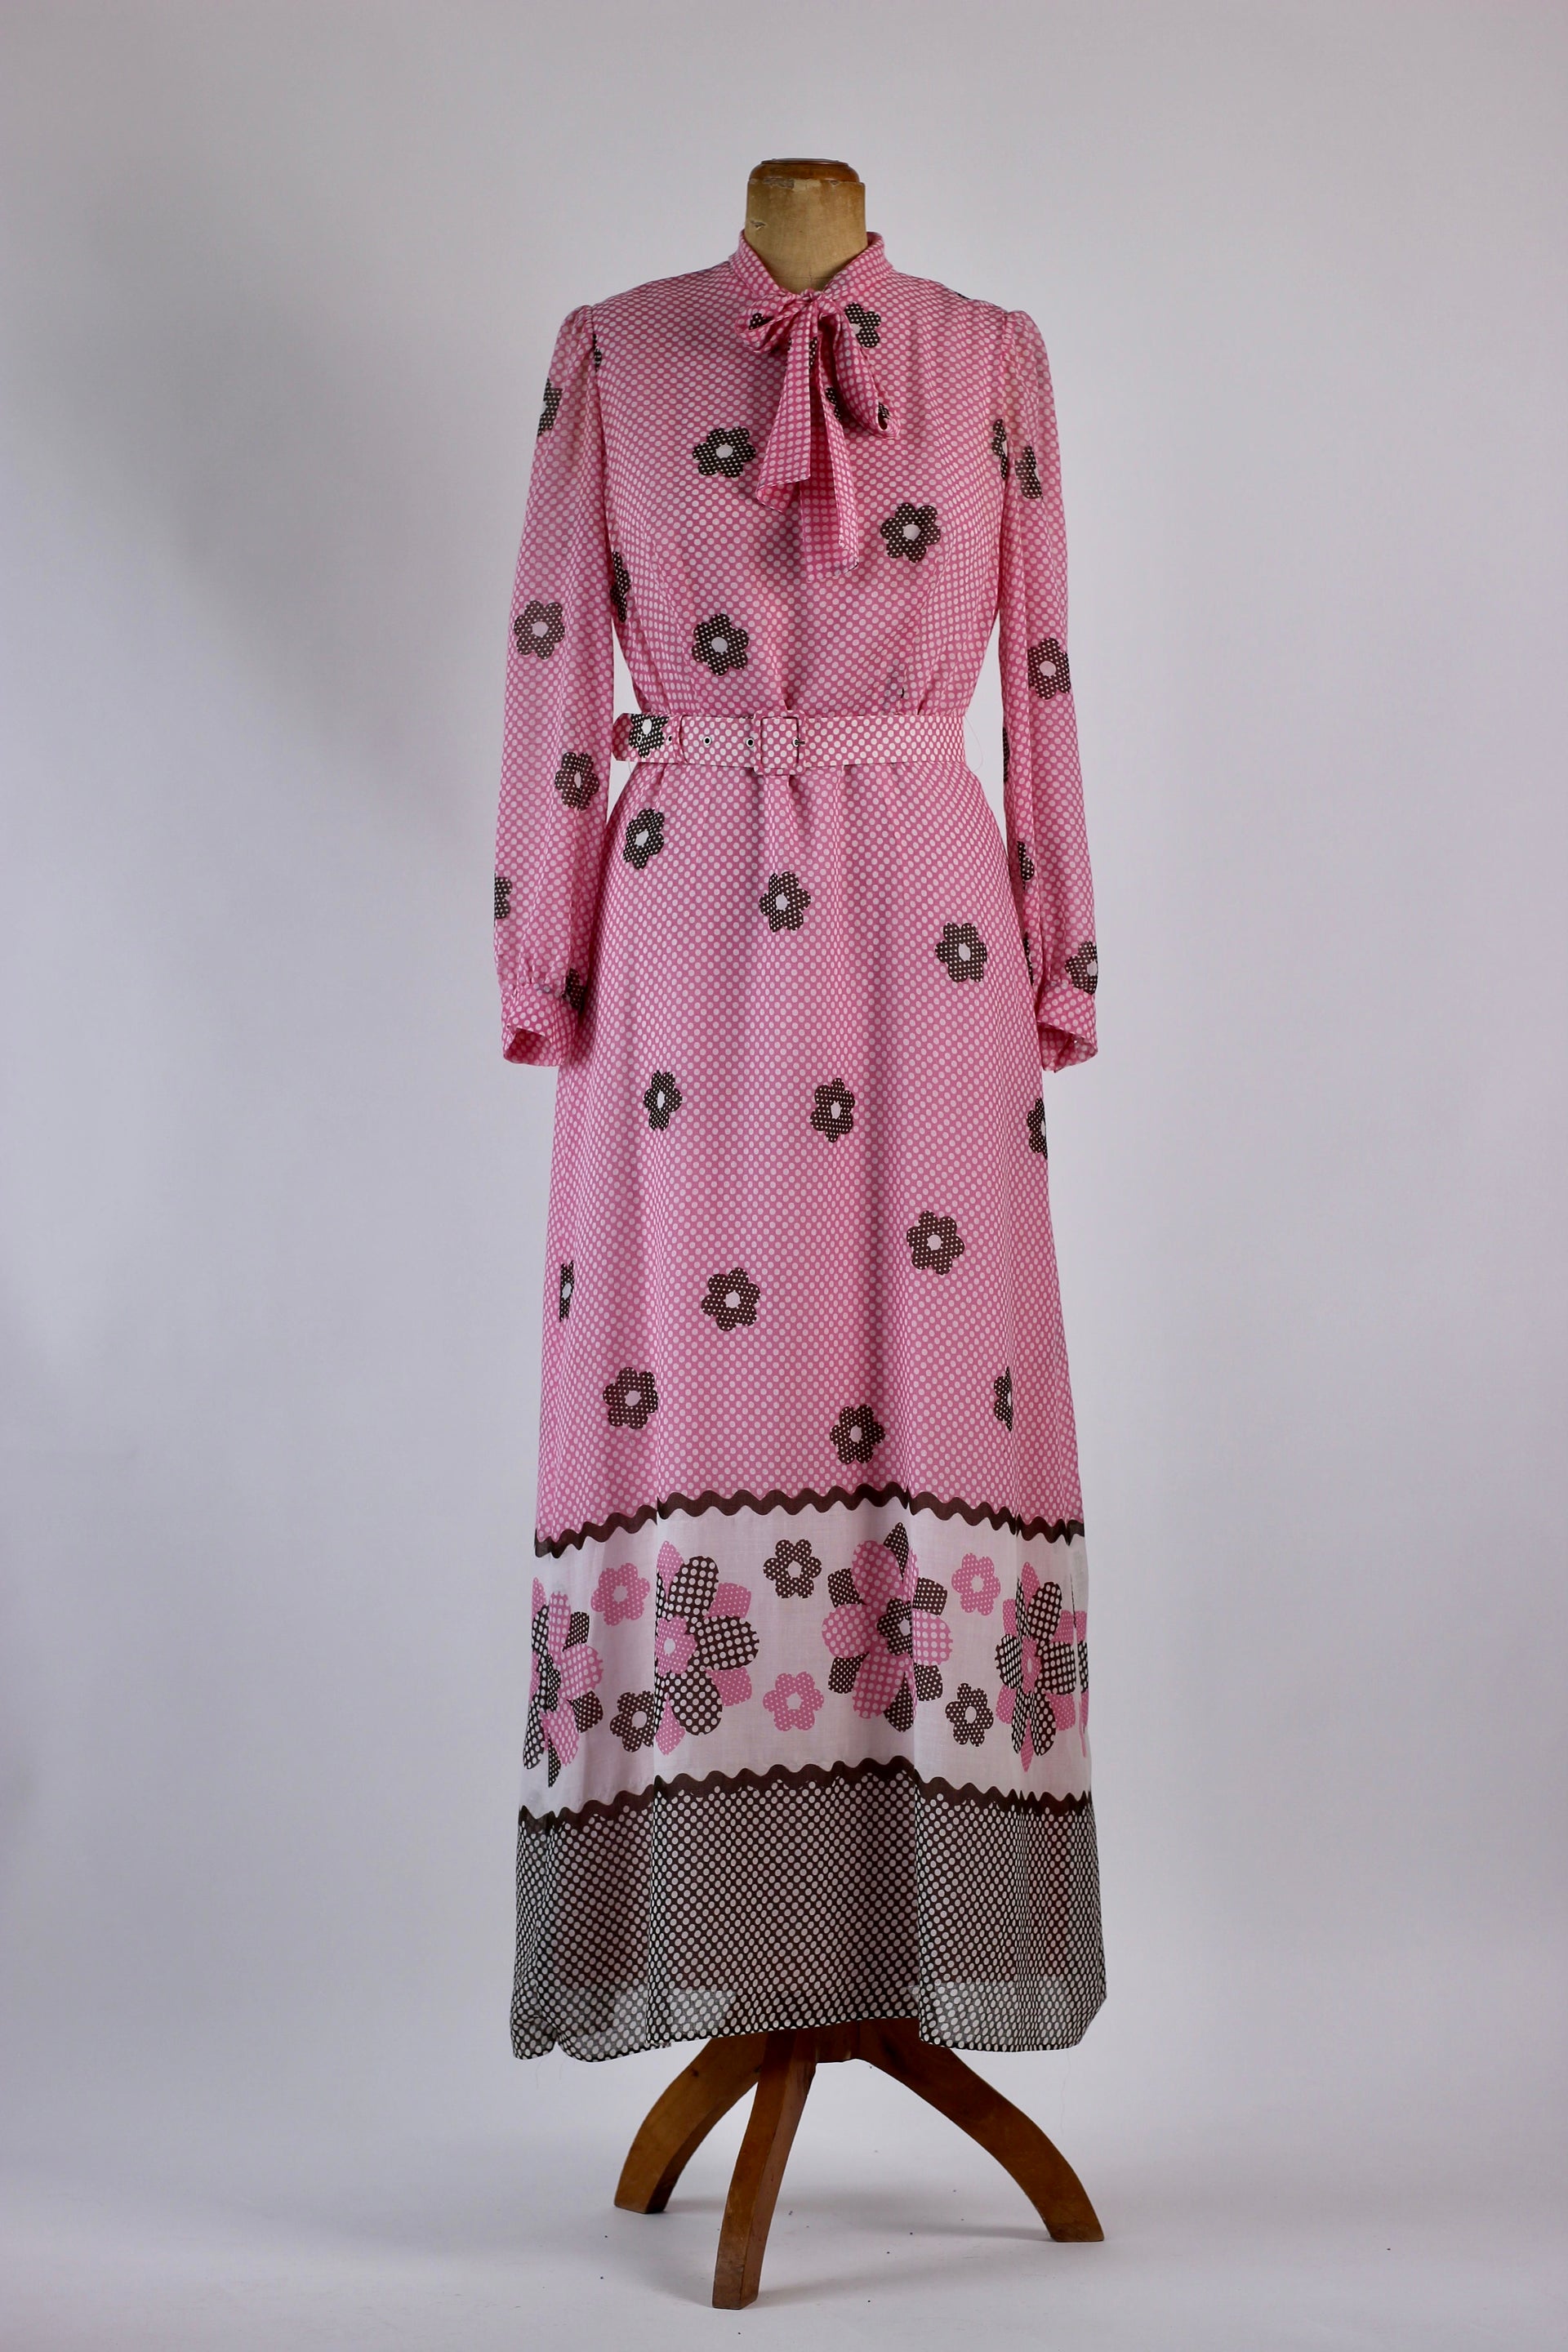 1960s Vintage Pink Belted Maxi Dress//Made in Denmark//Size M/L